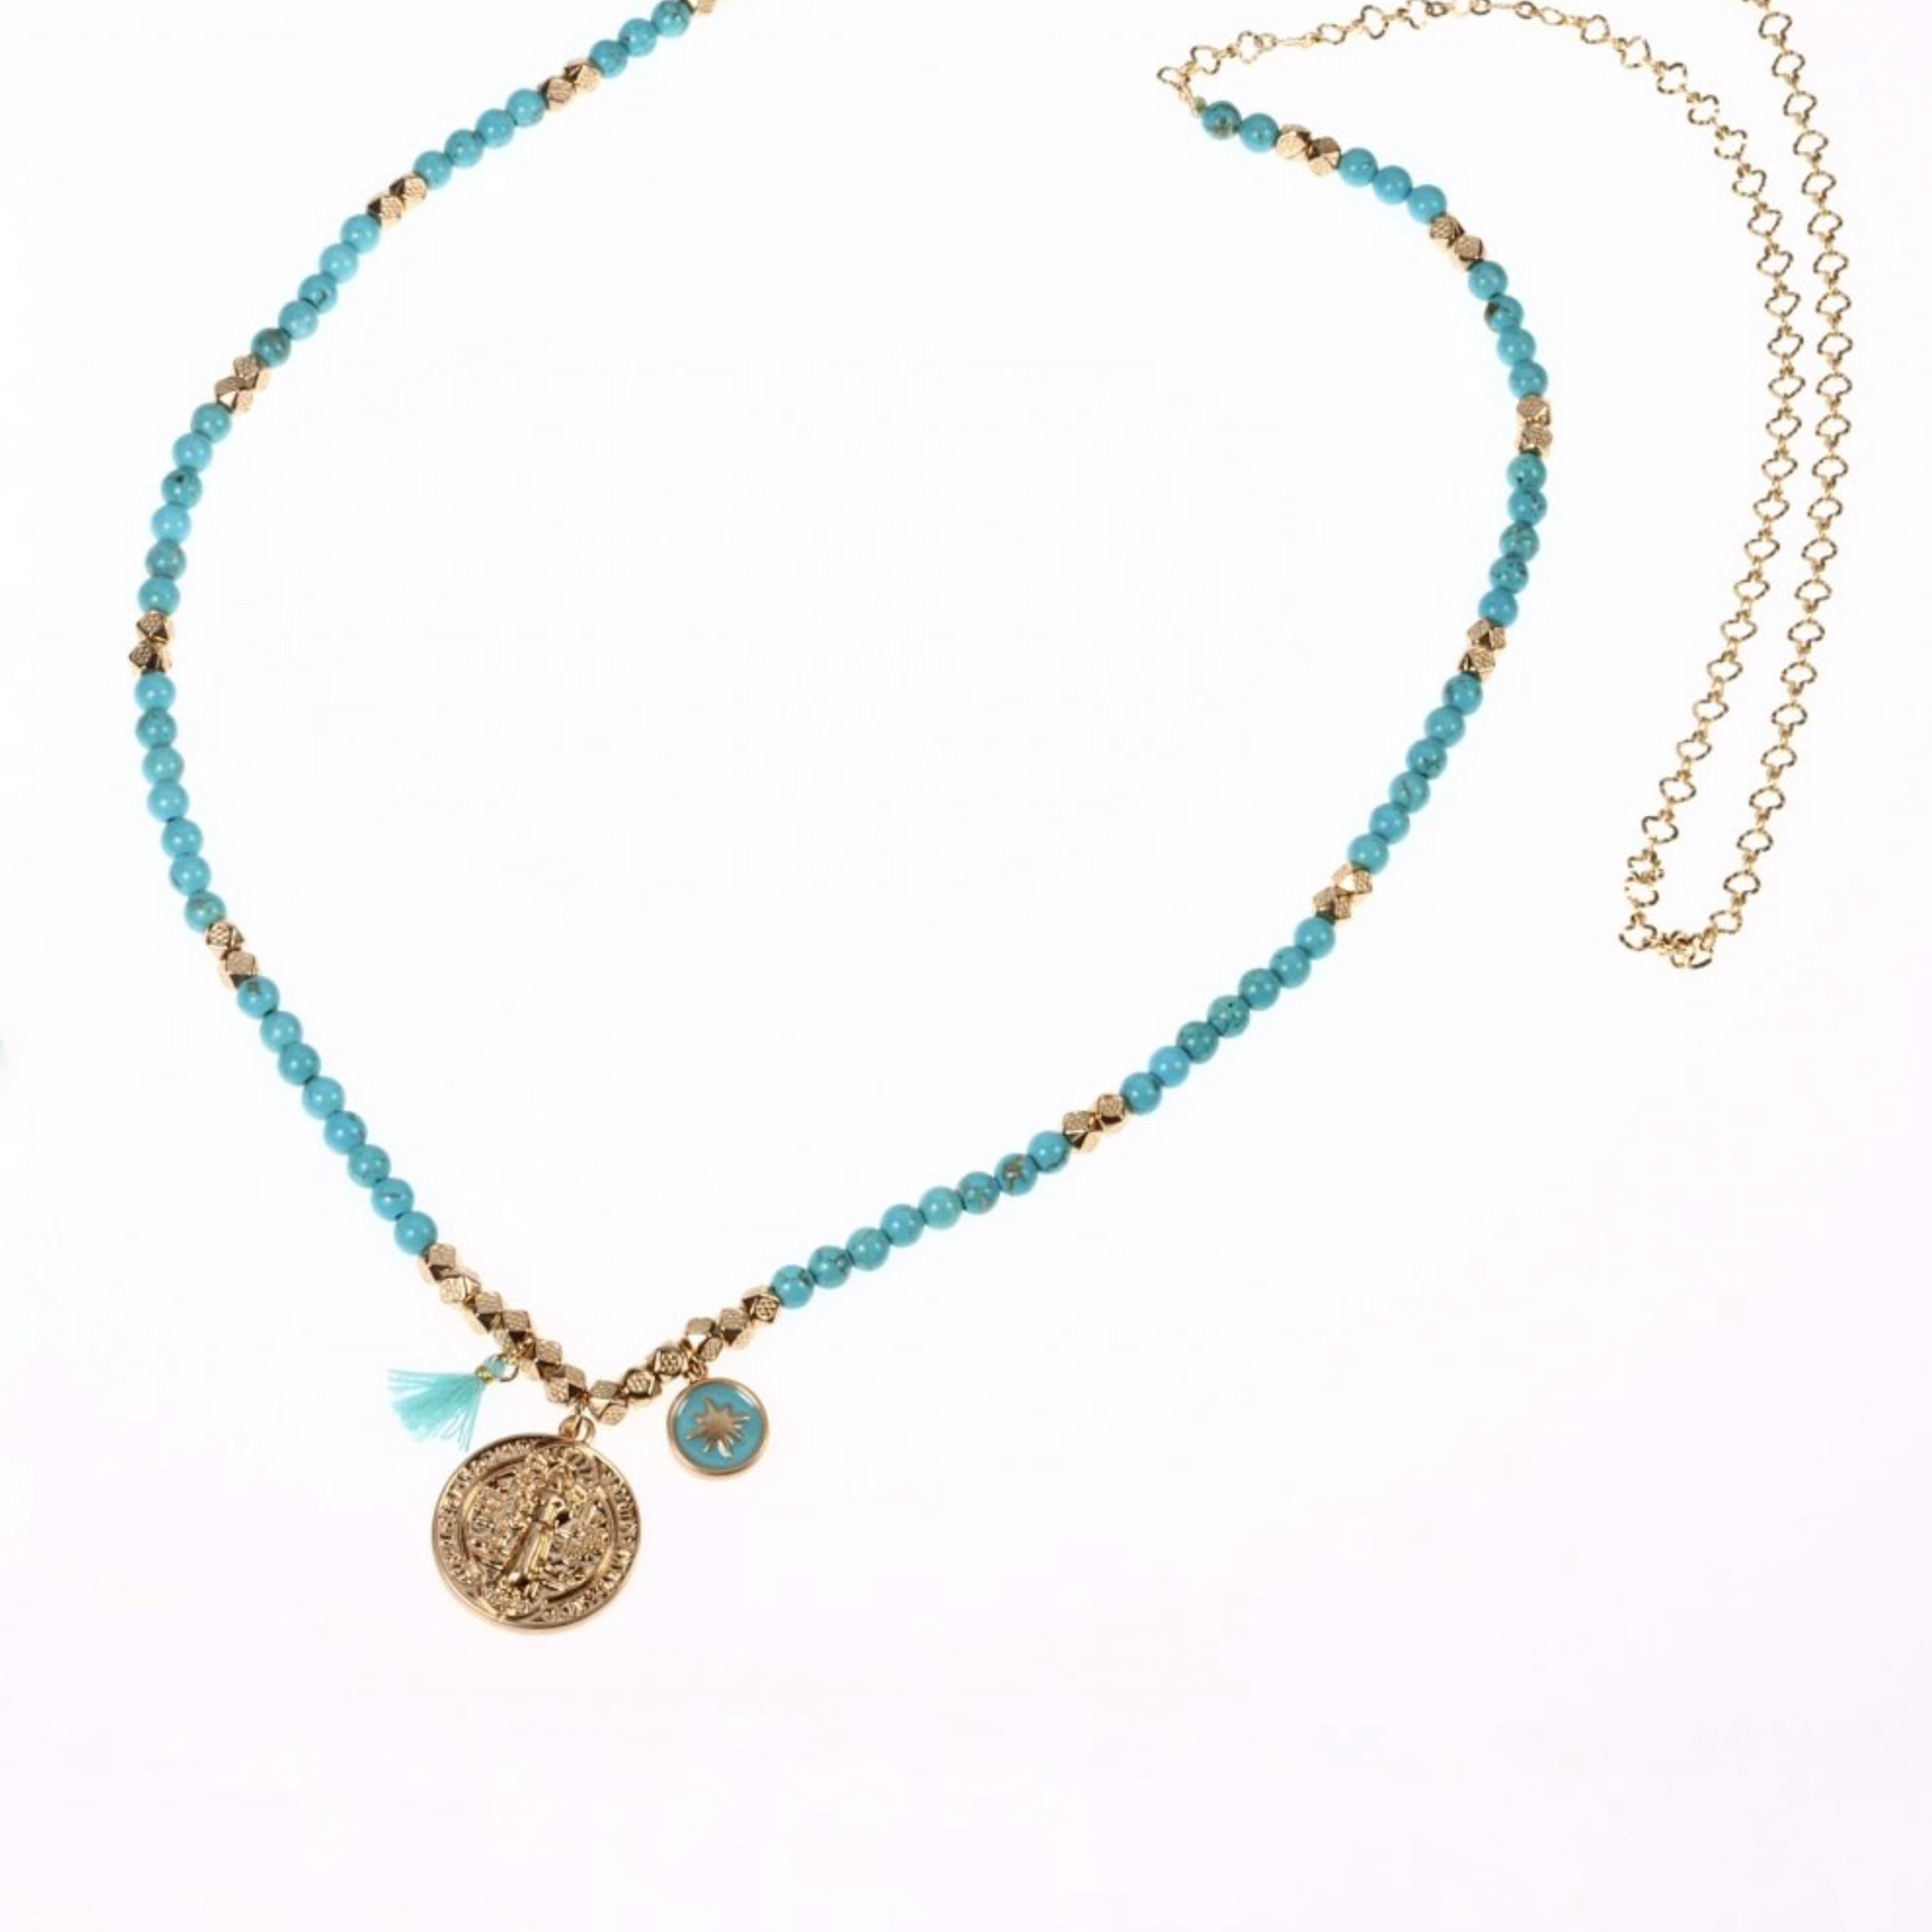 LIVIA LONG TURQUOISE NECKLACE